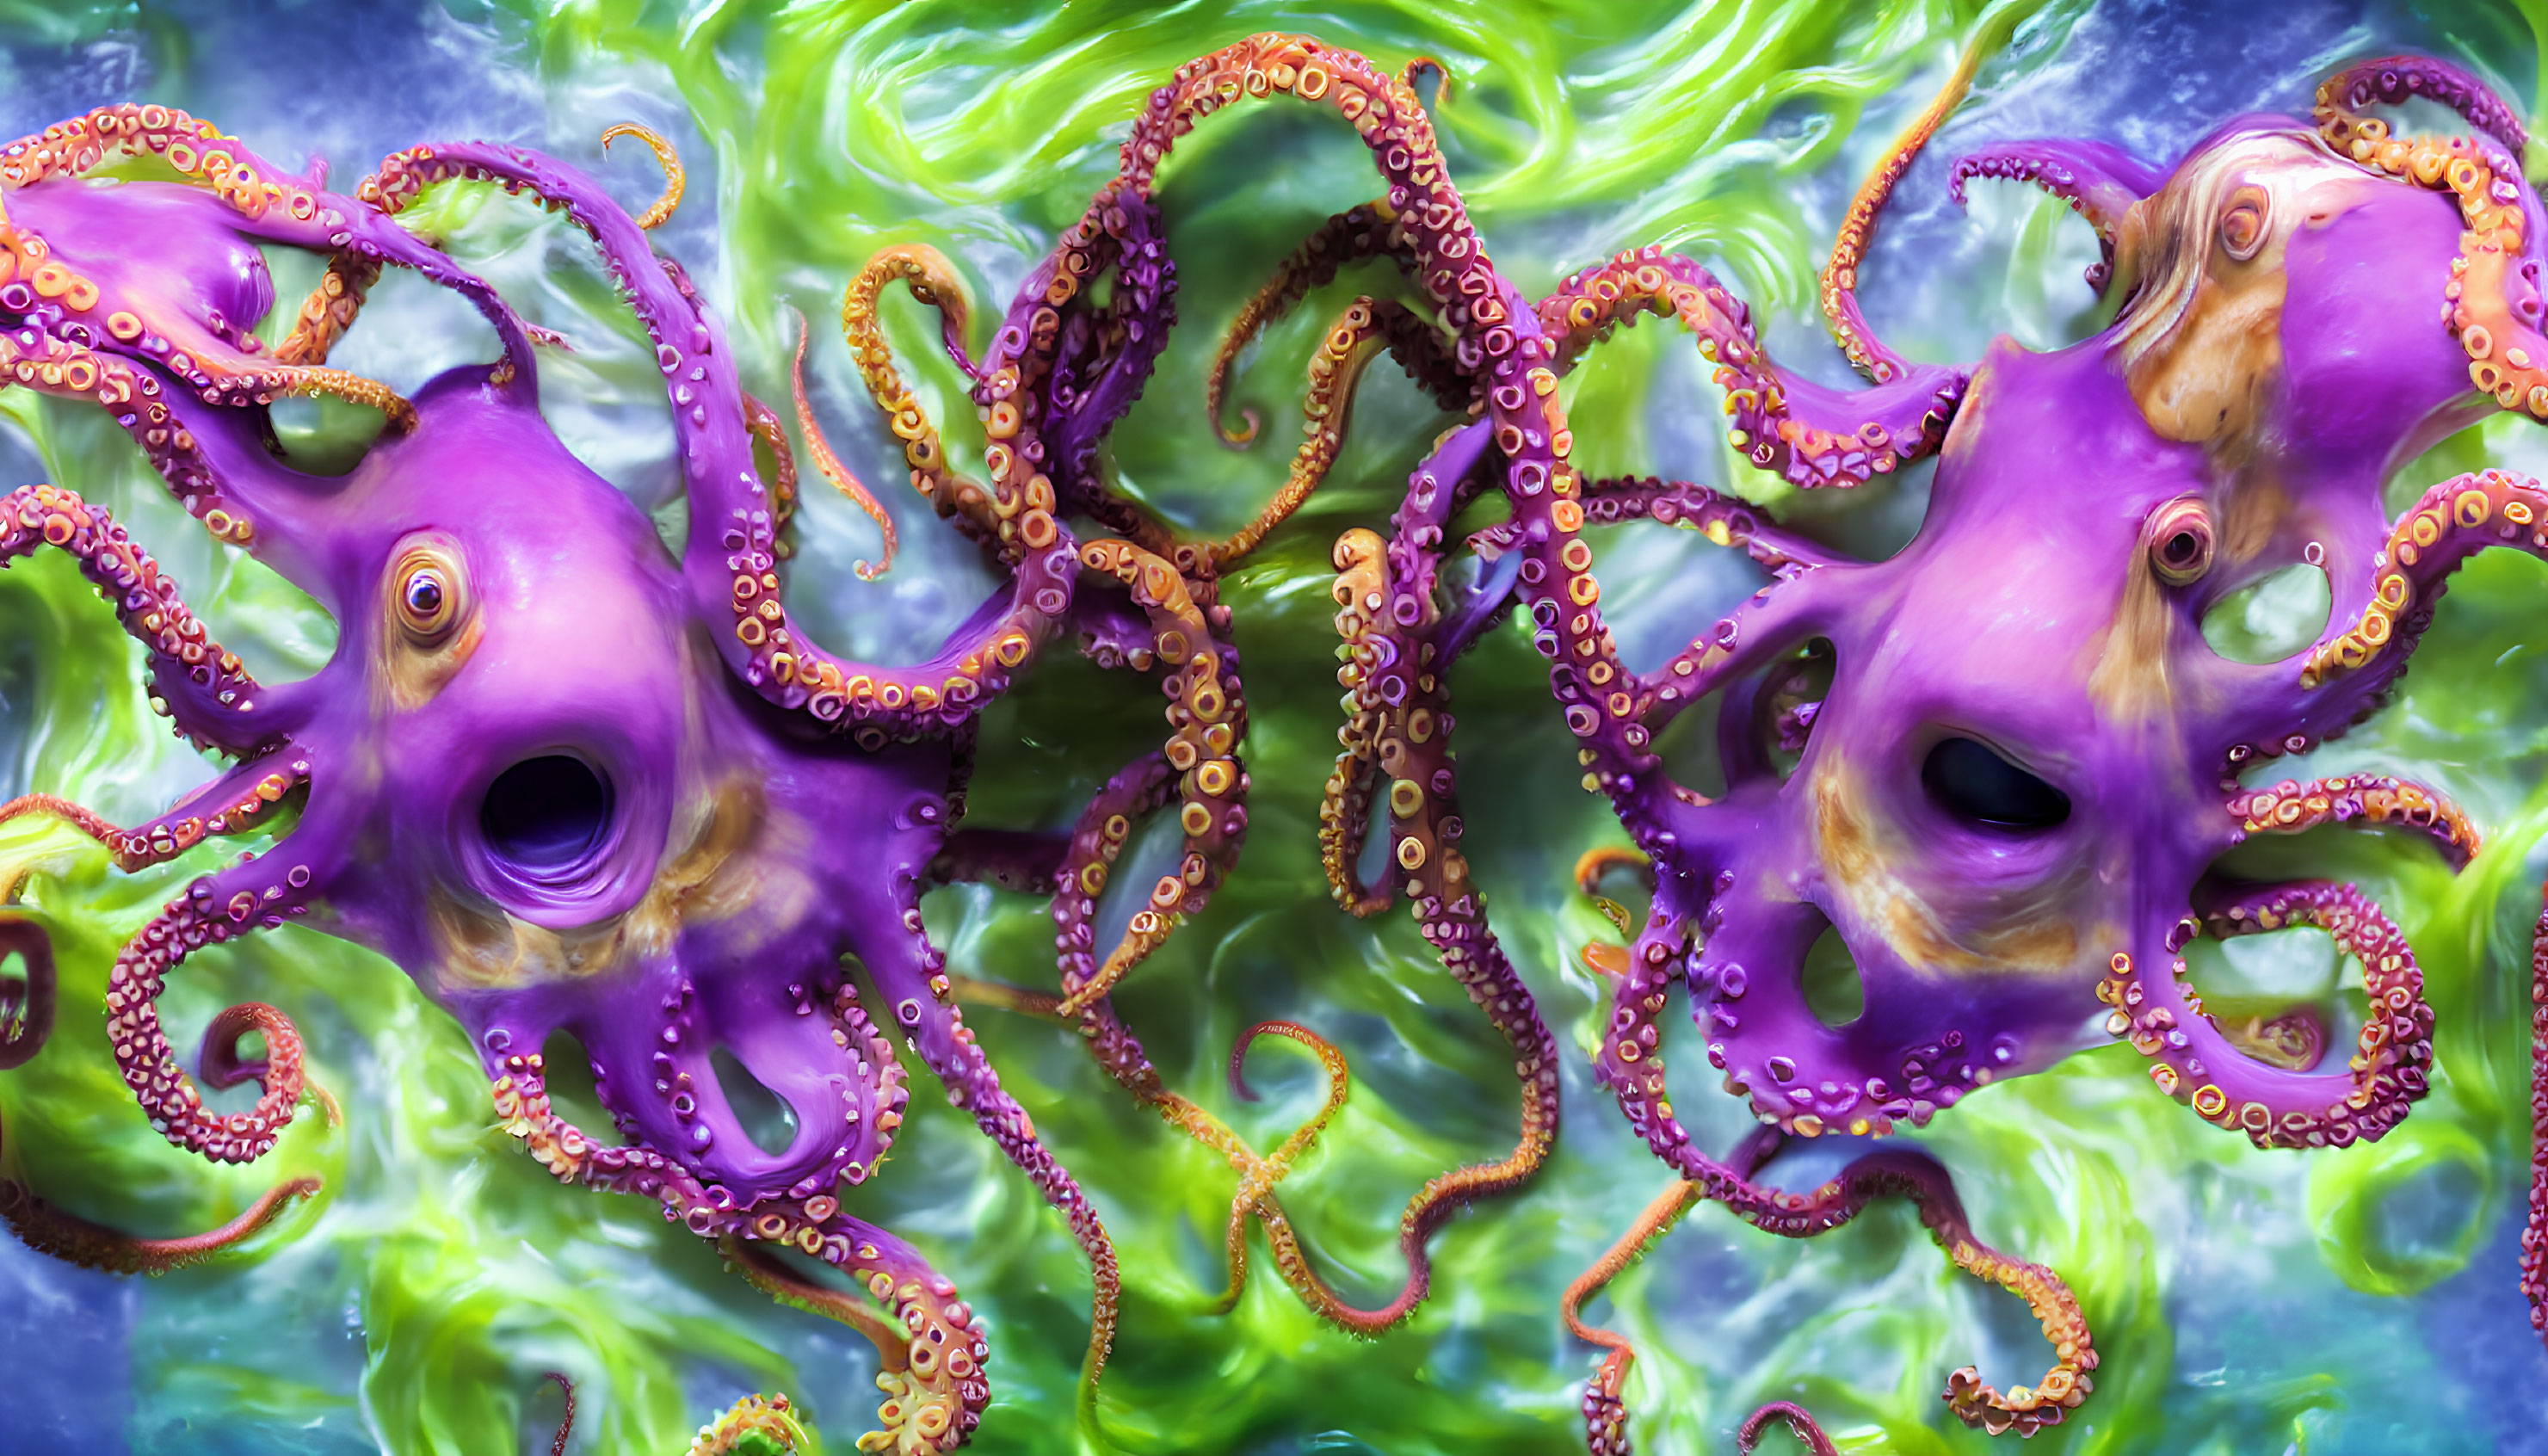 Purple Octopuses with Swirling Tentacles on Marbled Background